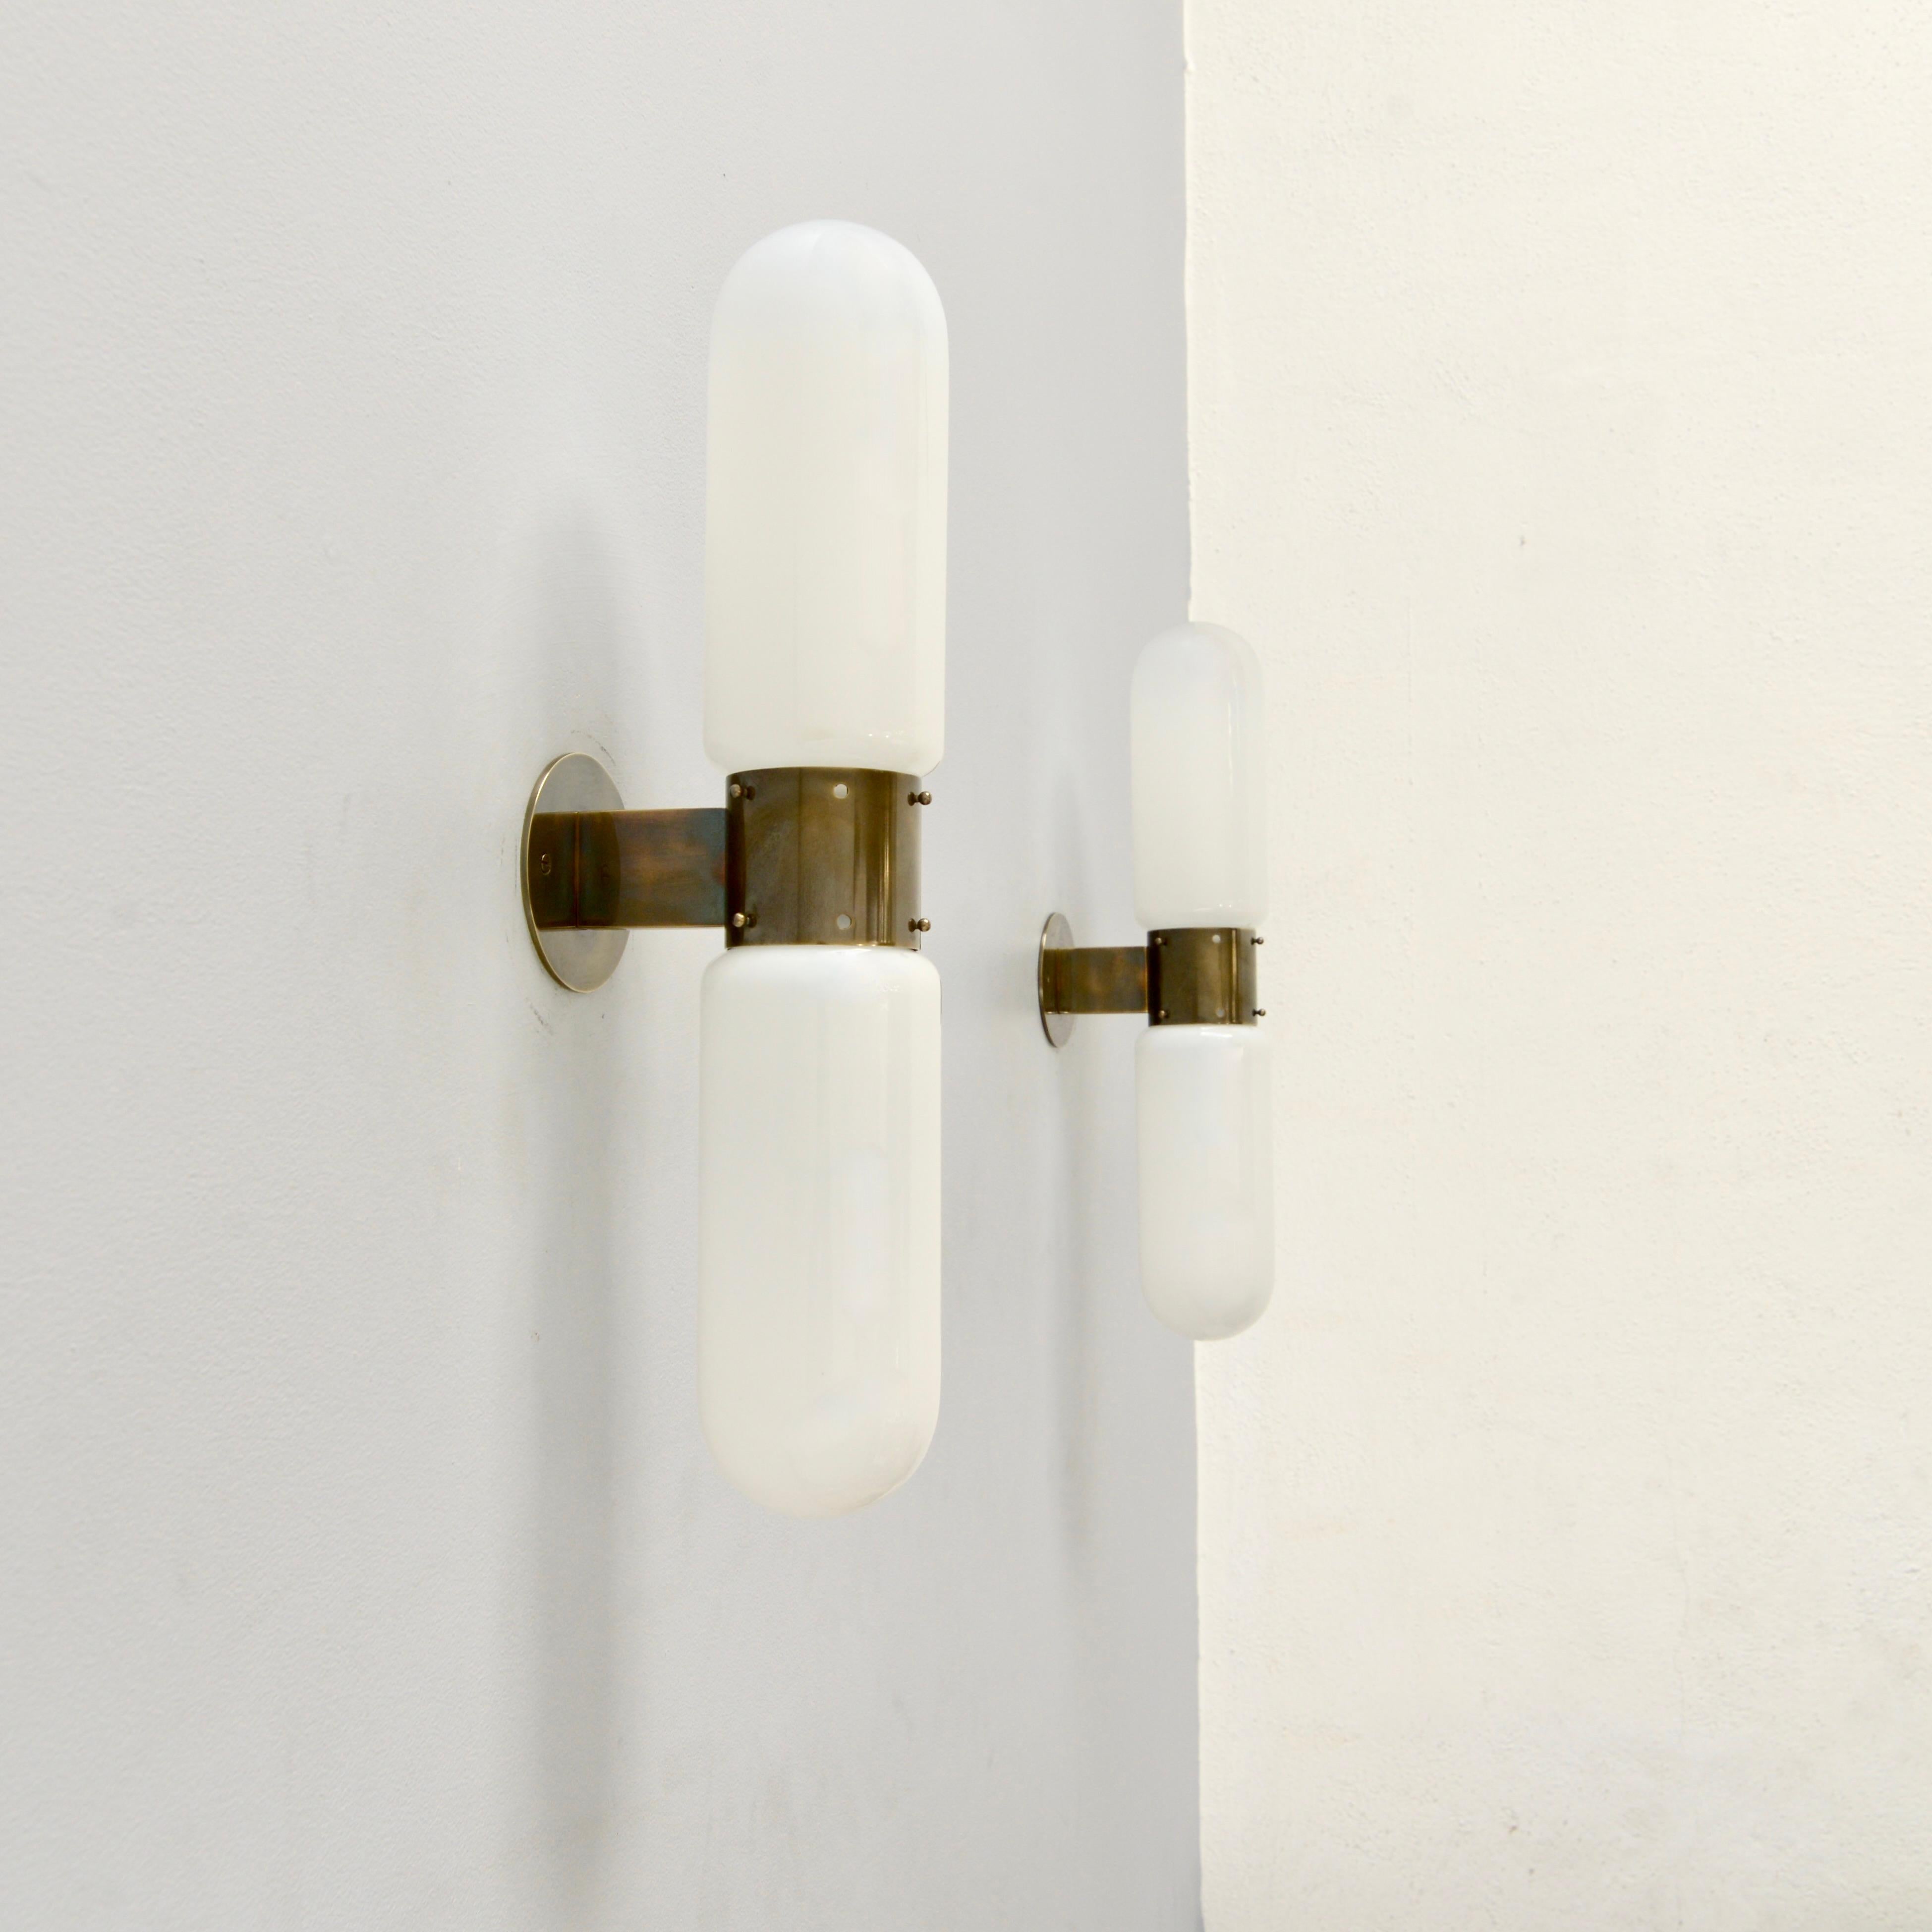 One pair of Italian “Pill” sconces by Carlo Nason for Mazzega . These fully restored sconces are in the original brass and blown glass. Their origins are circa 1960s. Wired with two E-26 medium based sockets per sconce. These fixtures can be wired